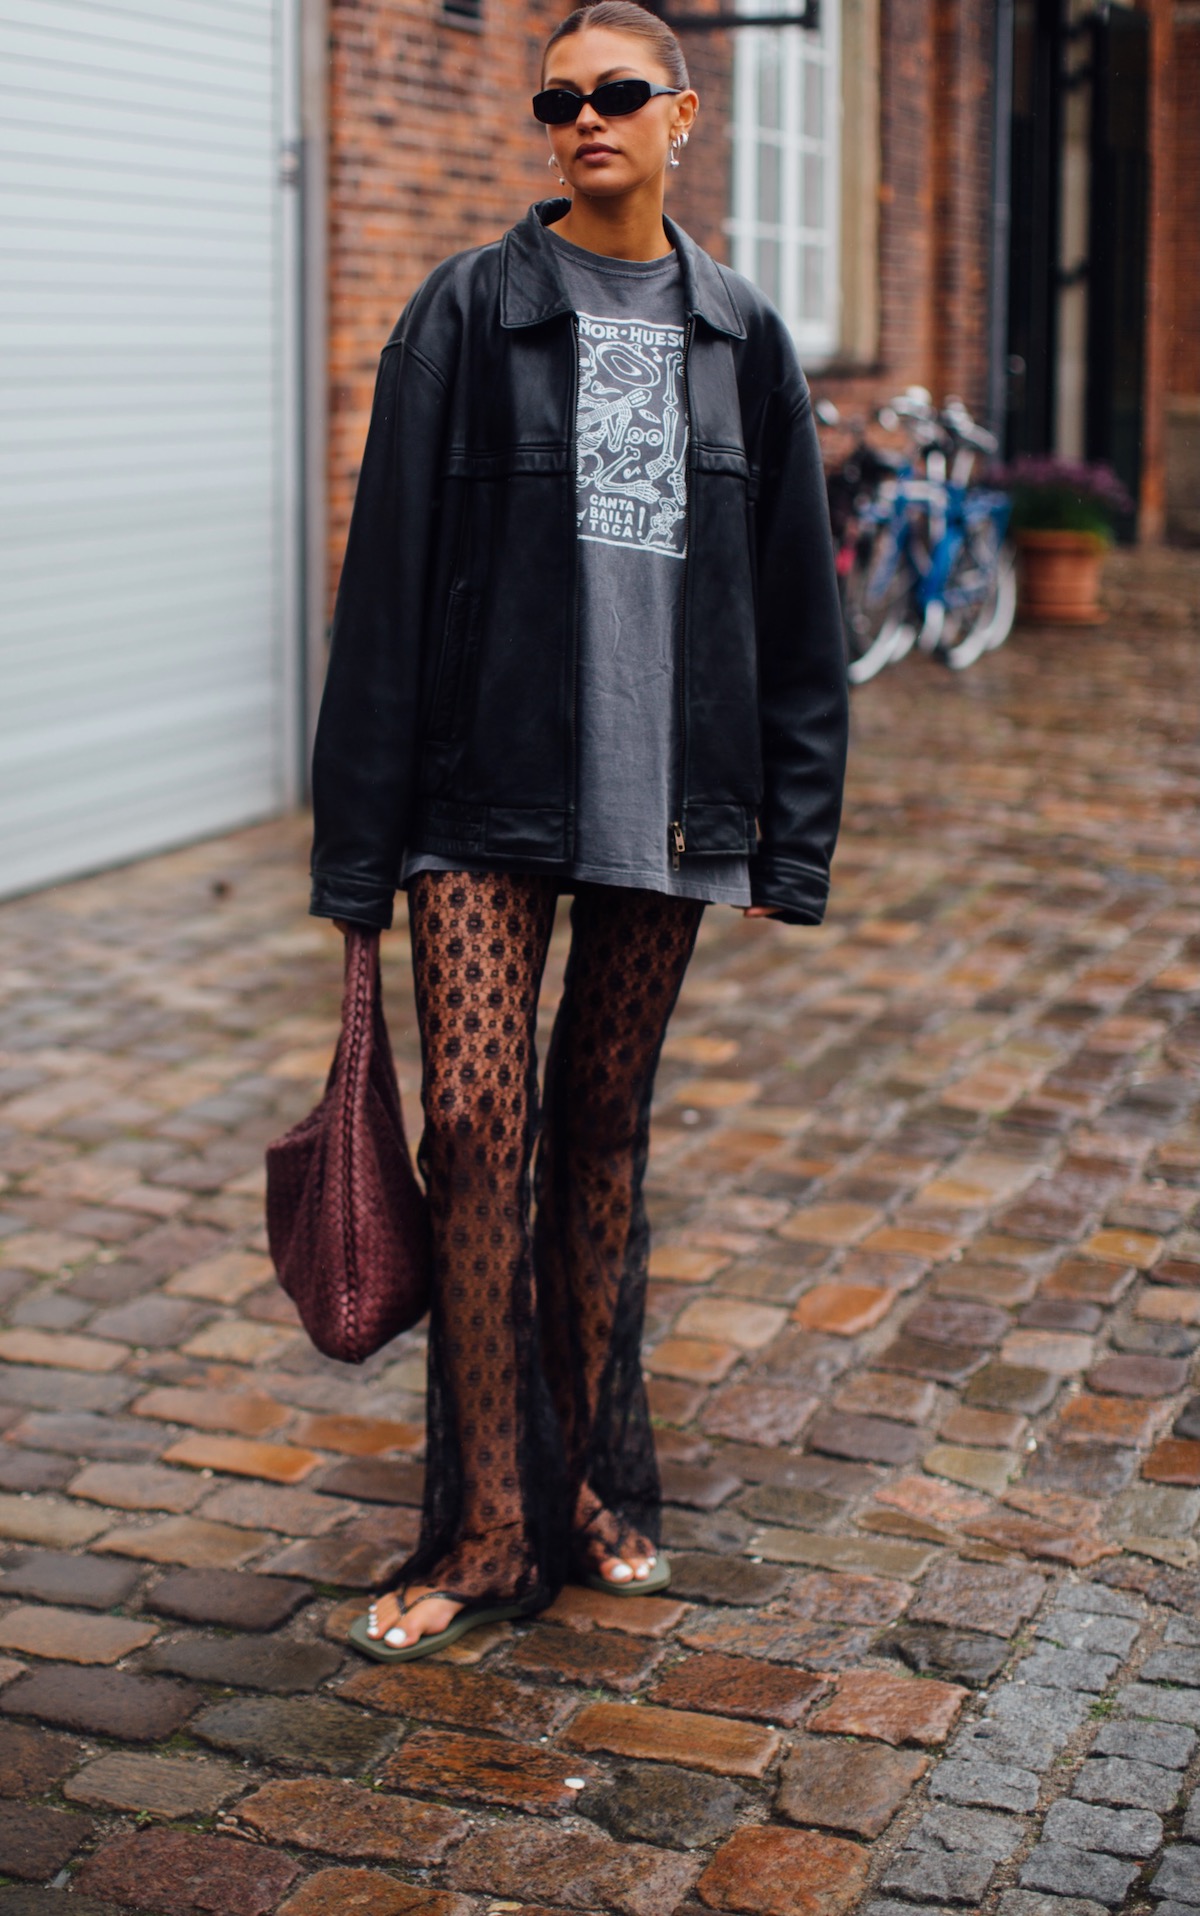 Sheer Pants Are Street Style Staples